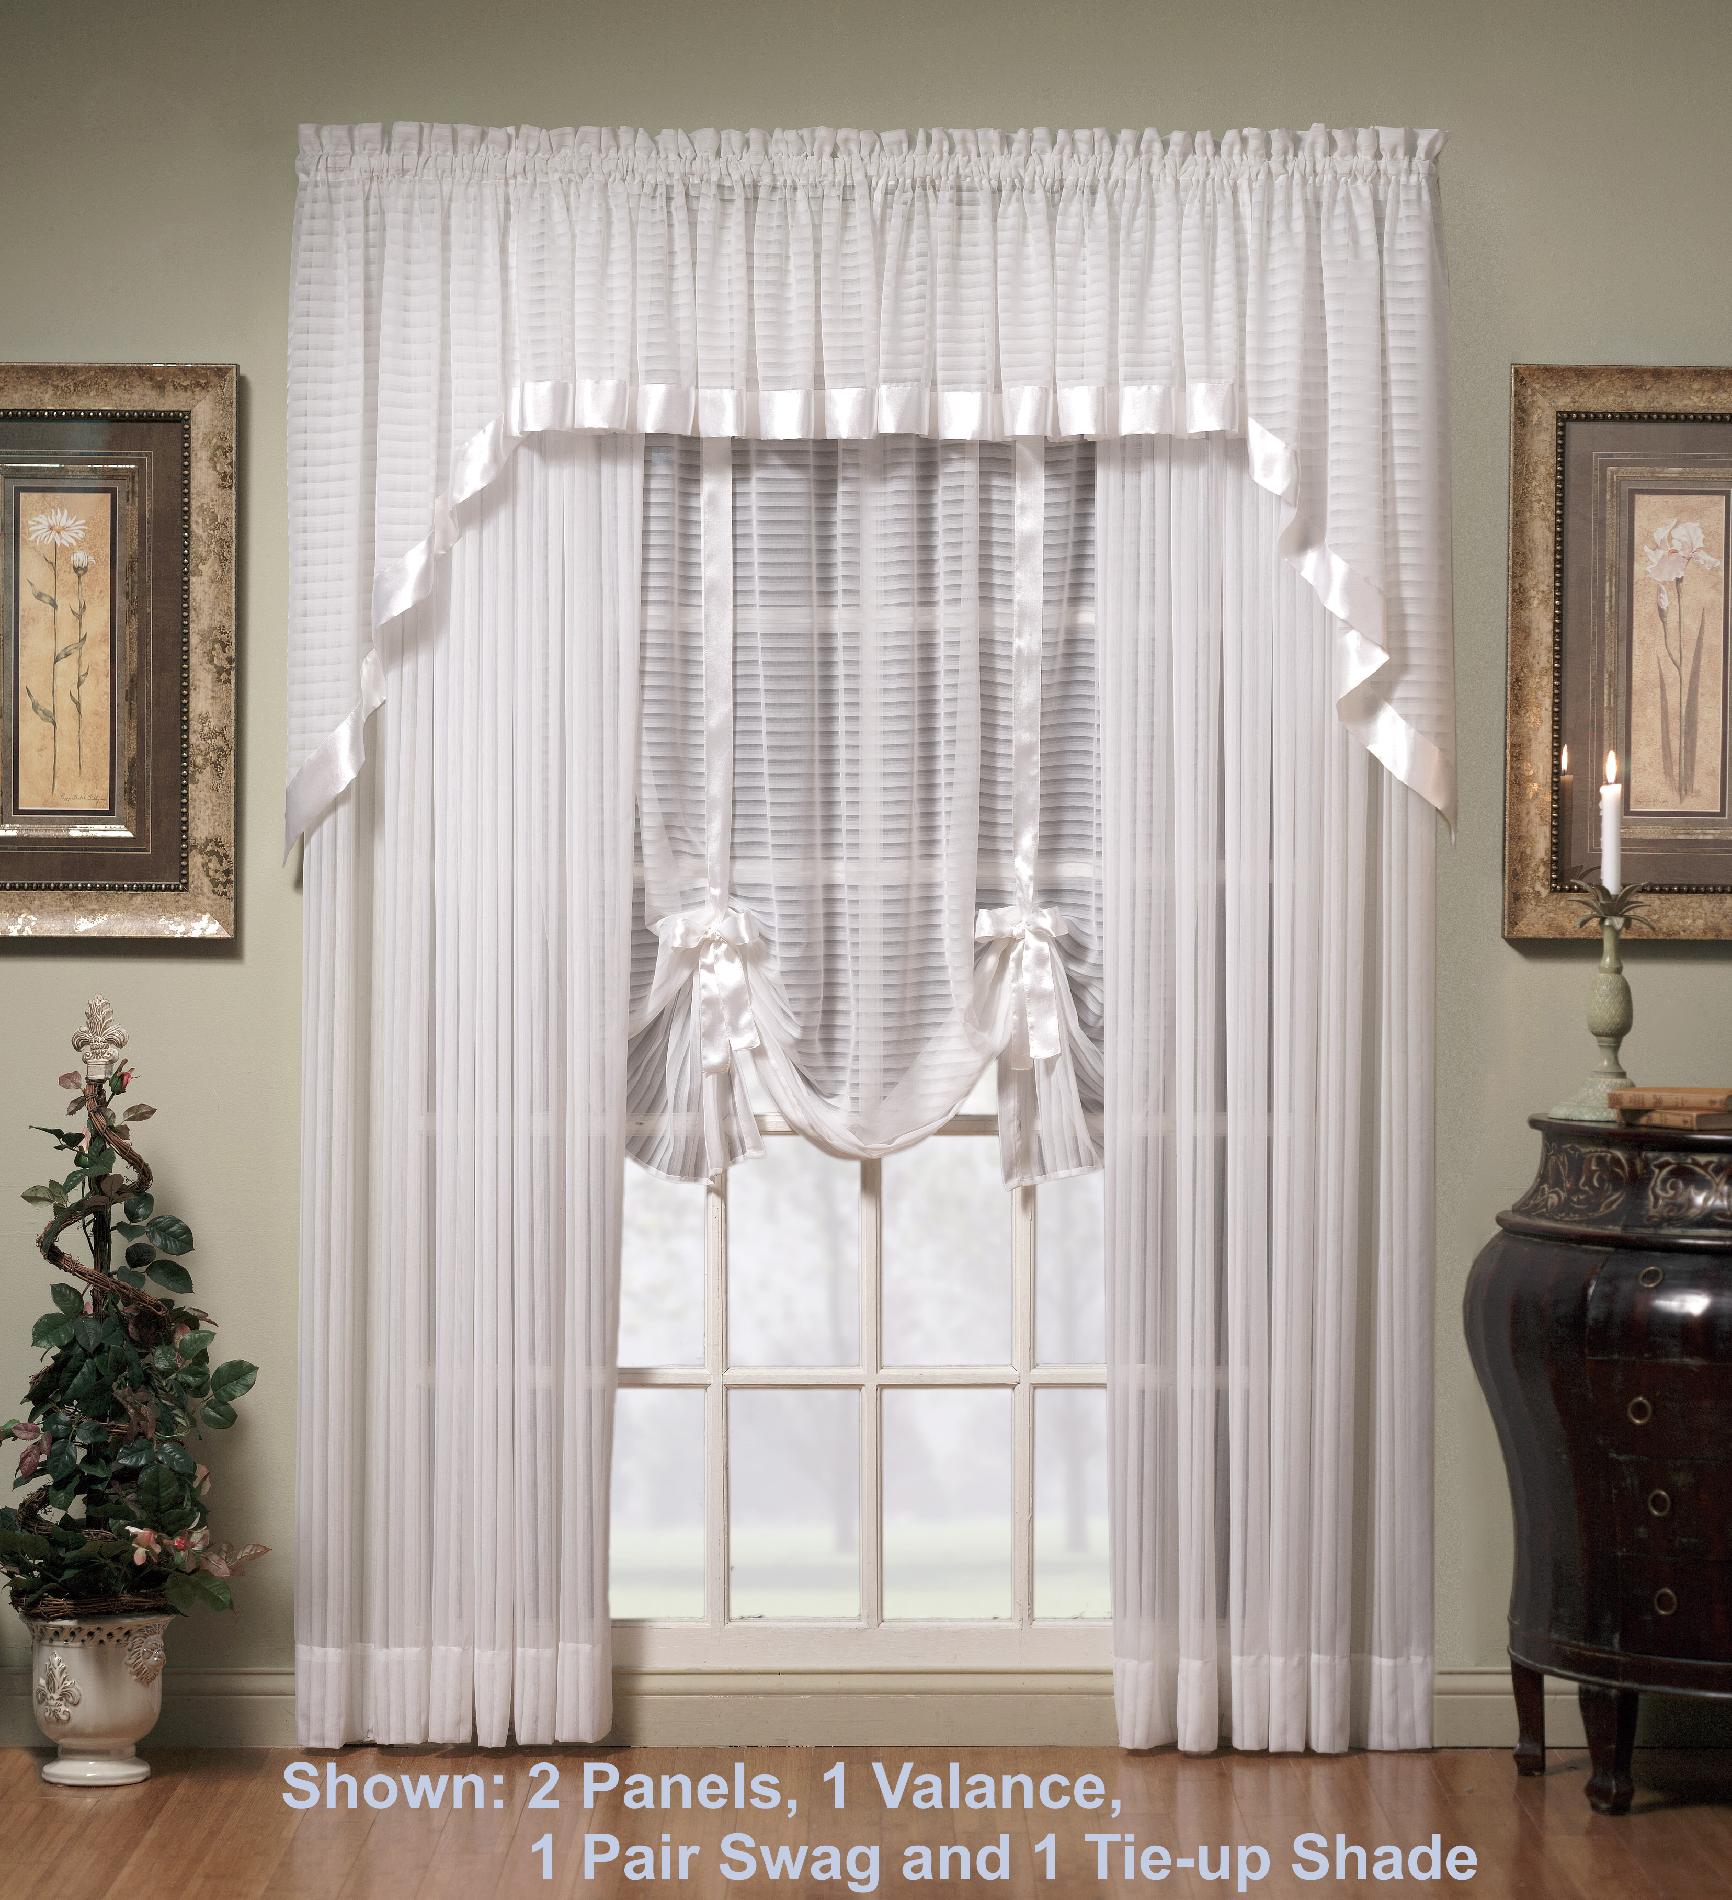 Today's Curtain Silhouette 15" Valance